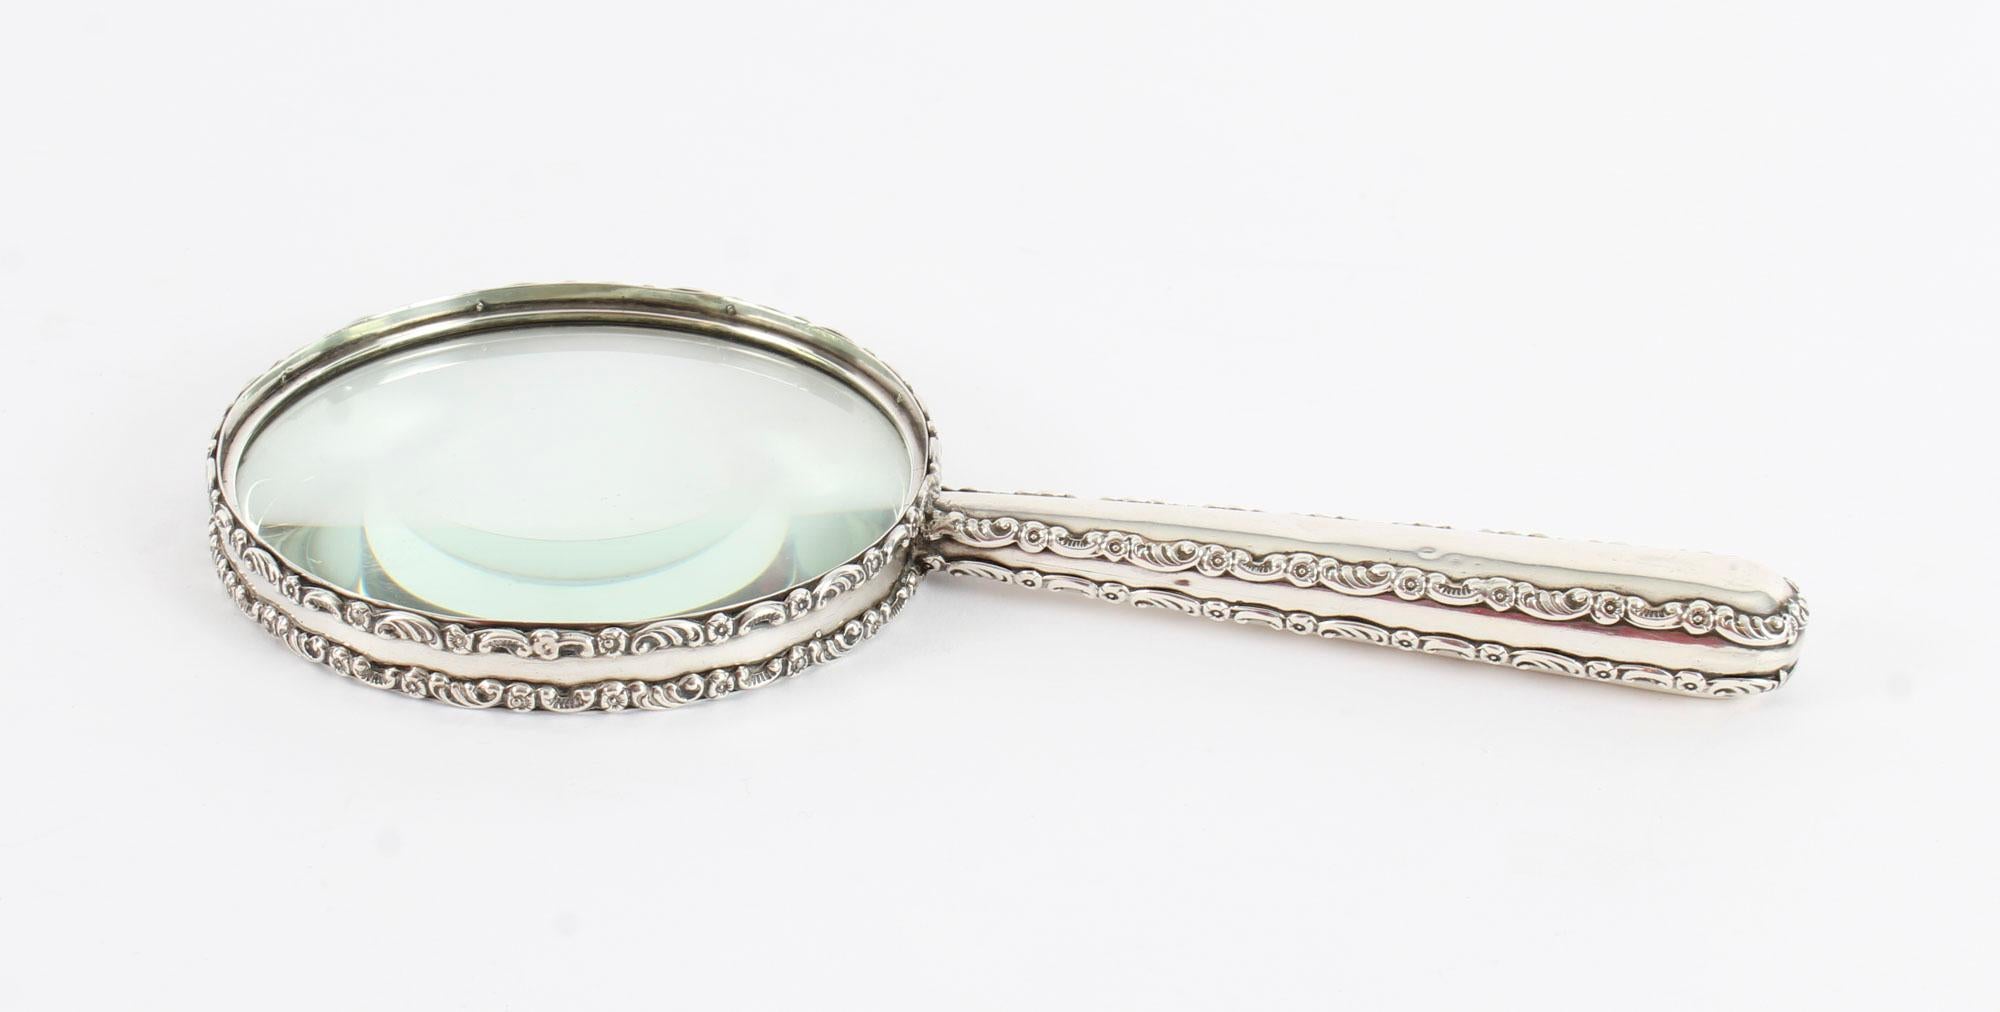 This is an exquisite Edwardian sterling silver magnifying glass with hallmarks for London 1905 and the makers mark of the renowned retailer and silversmith, Goldsmiths & Silversmiths Company.

It has features an embossed outline throughout with